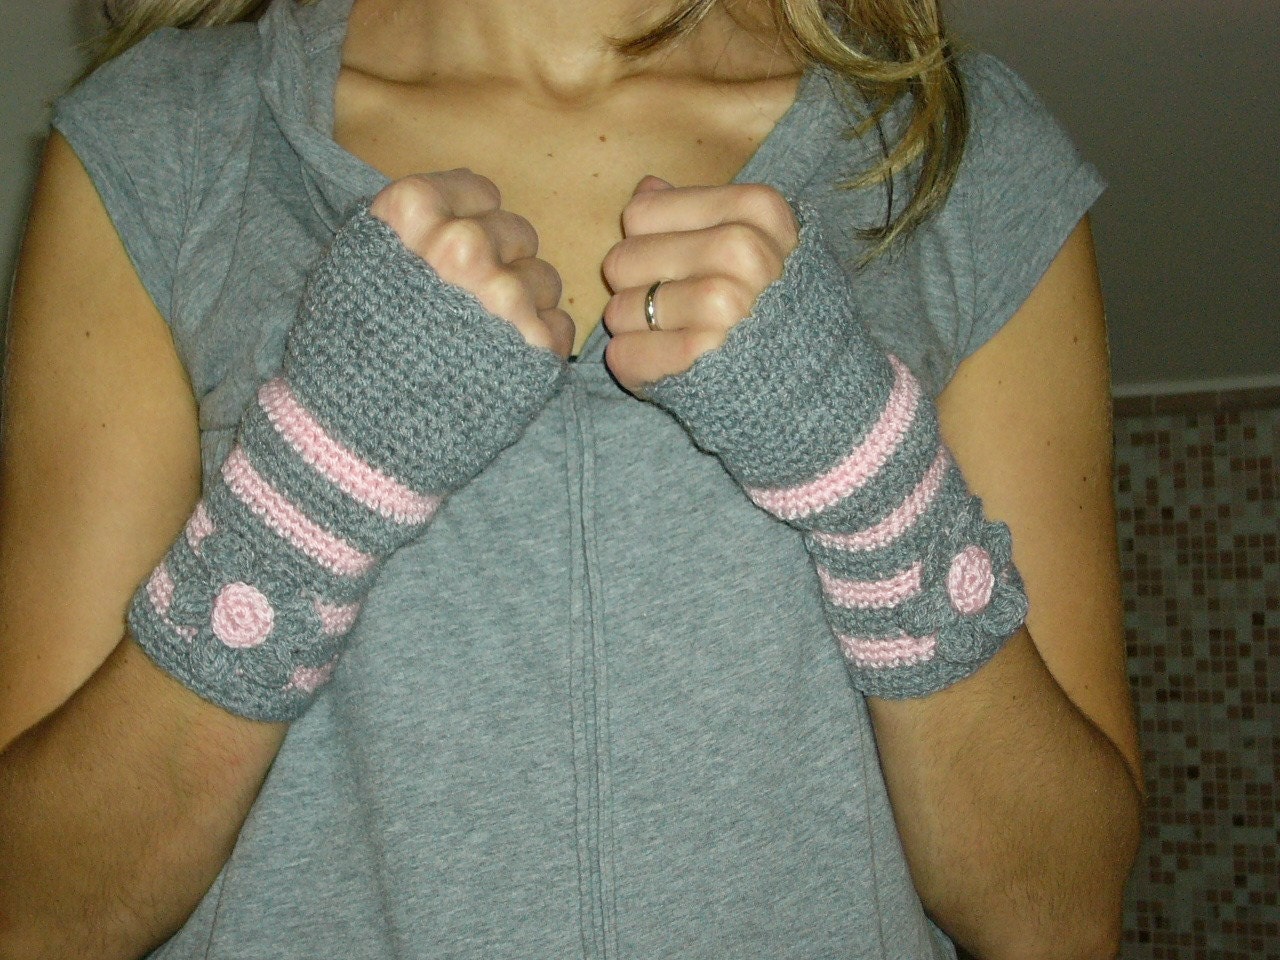 Crochet Fingerless Gloves - Compare Prices, Reviews and Buy at